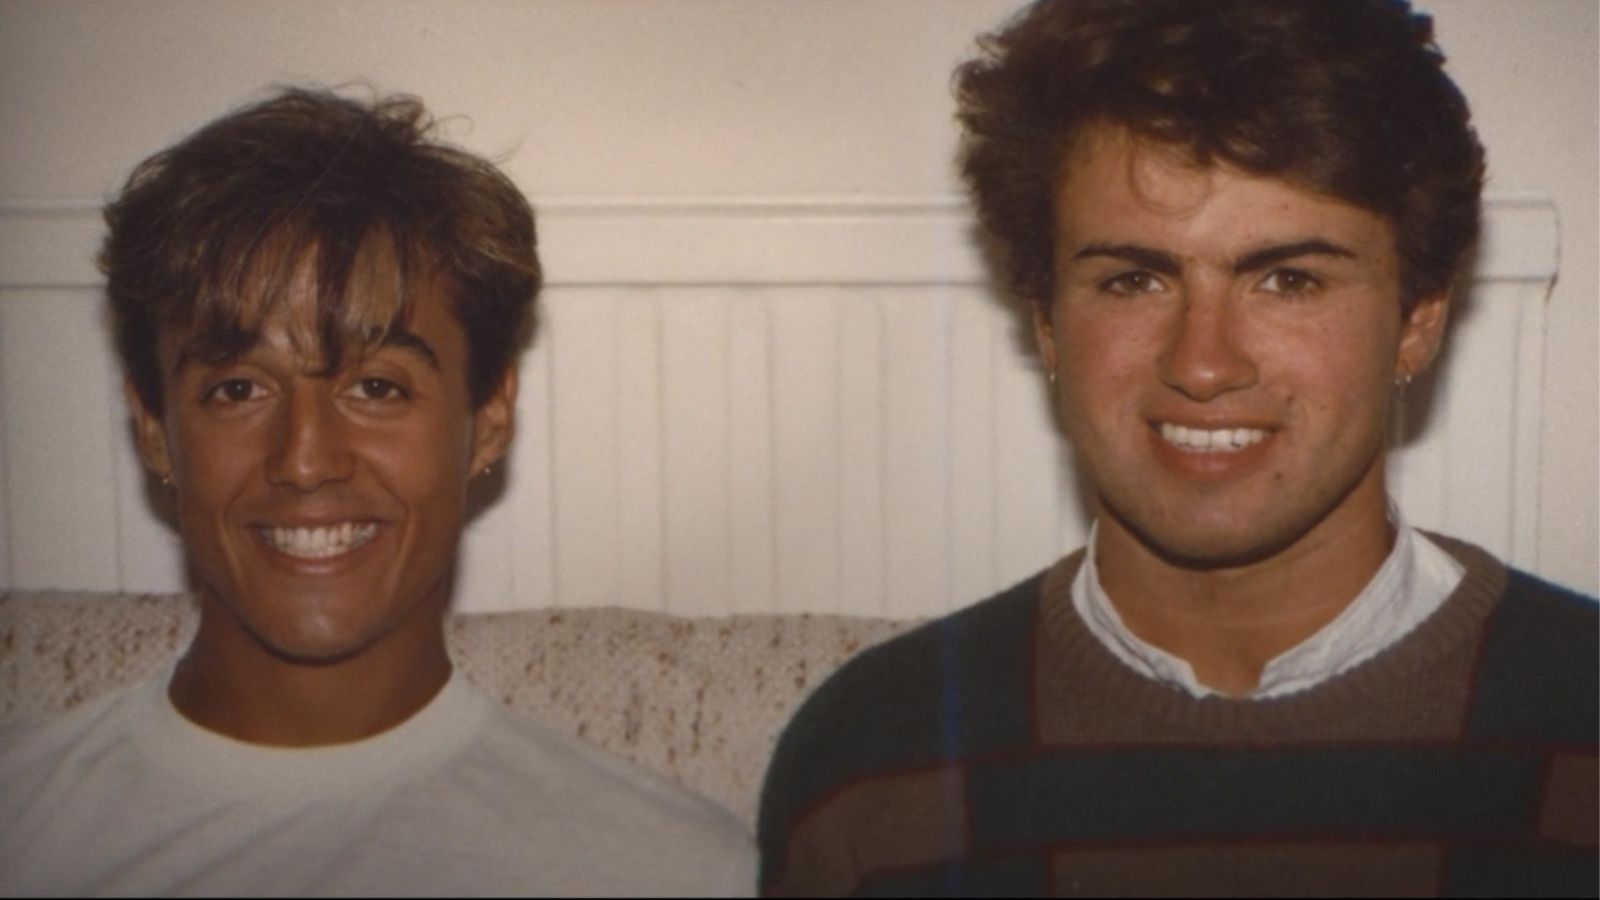 Why did Wham! break up? Netflix documentary to explore the band Woman